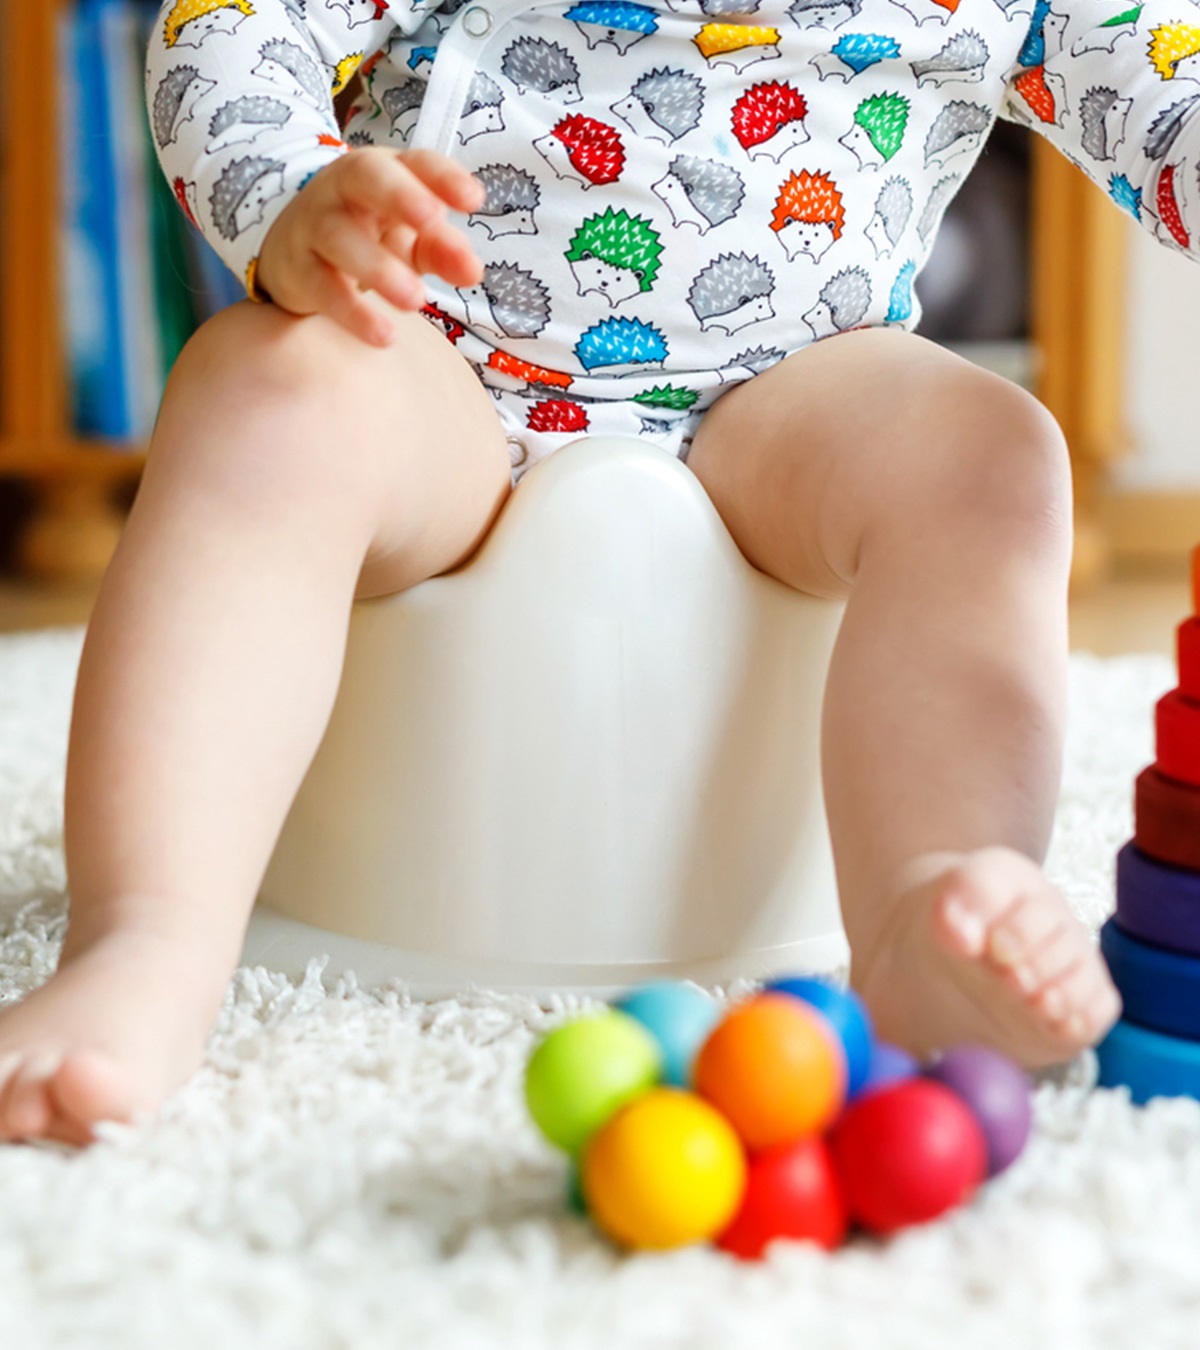 20 Funny Potty Training Games For Toddlers To Play